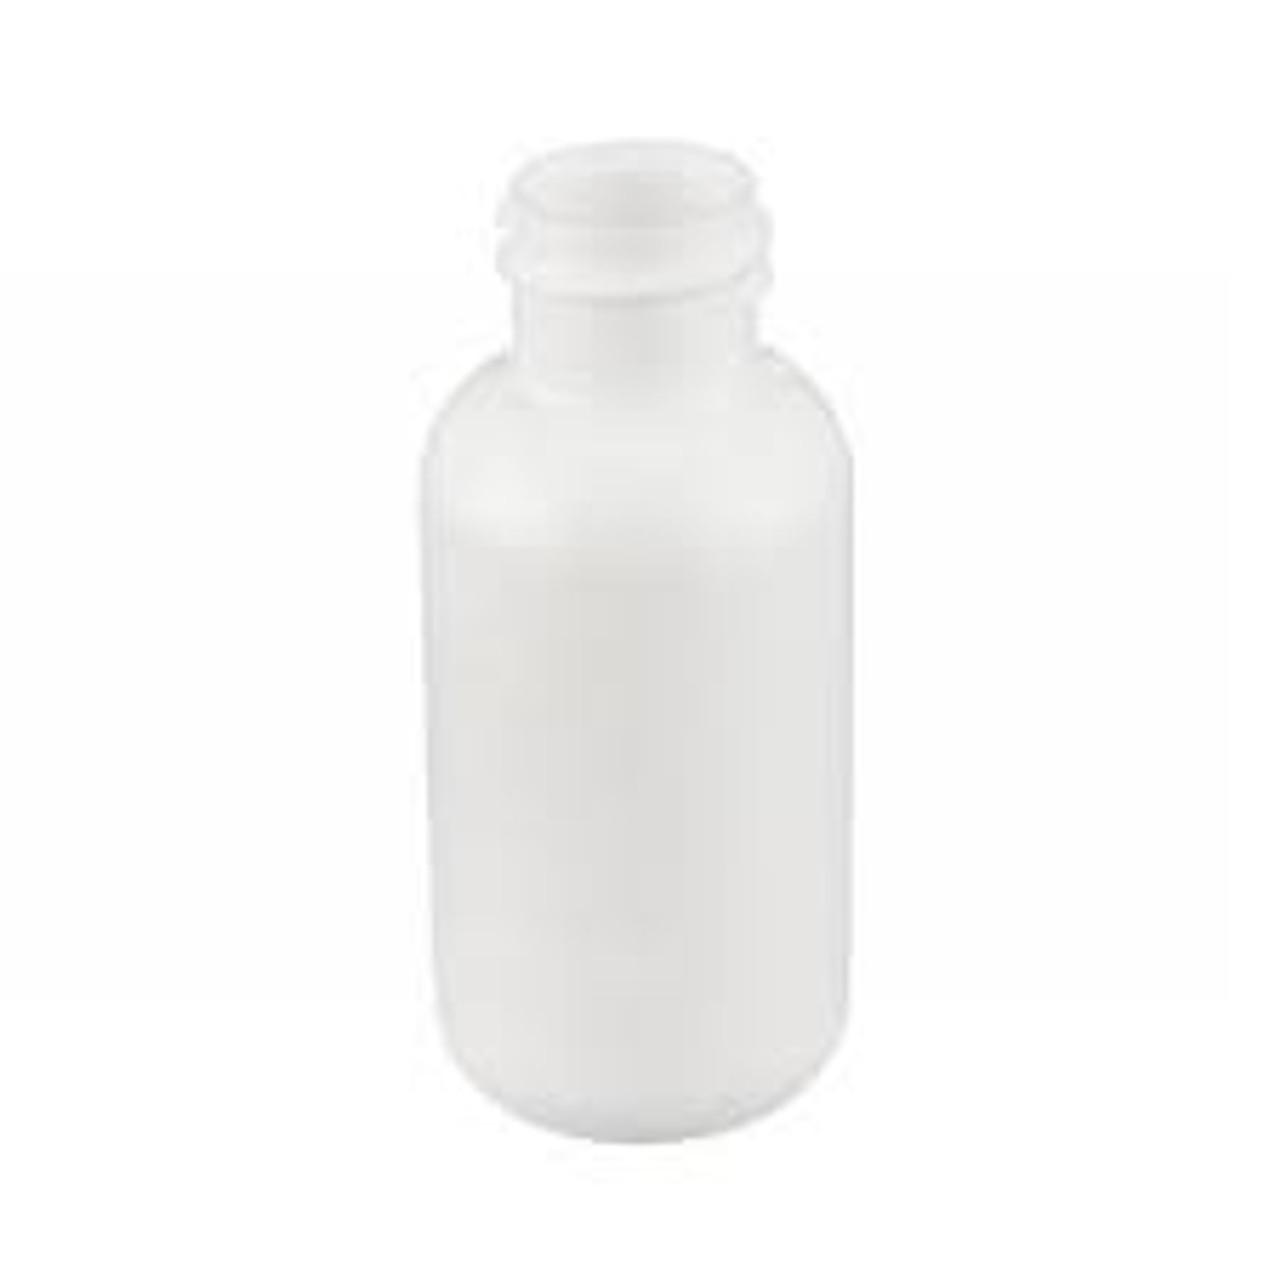 1/2 oz Natural LDPE Boston Round Bottles w/ Spout and Red Tip Cap